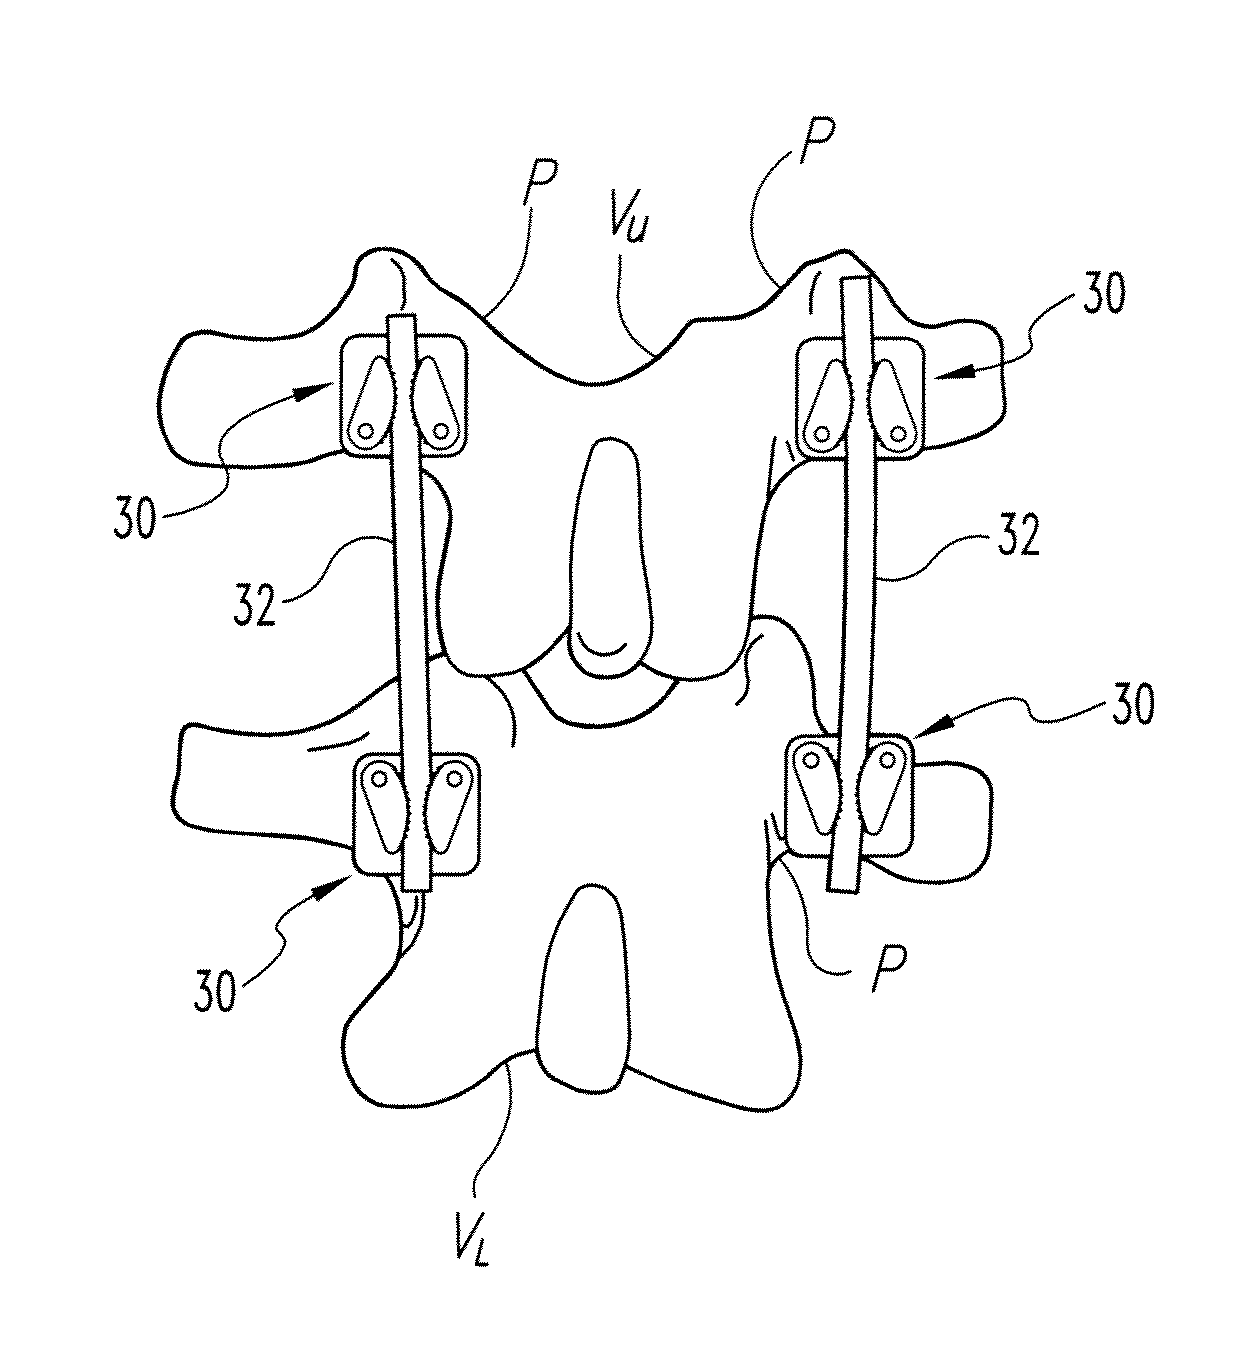 System and method for correcting spinal deformity